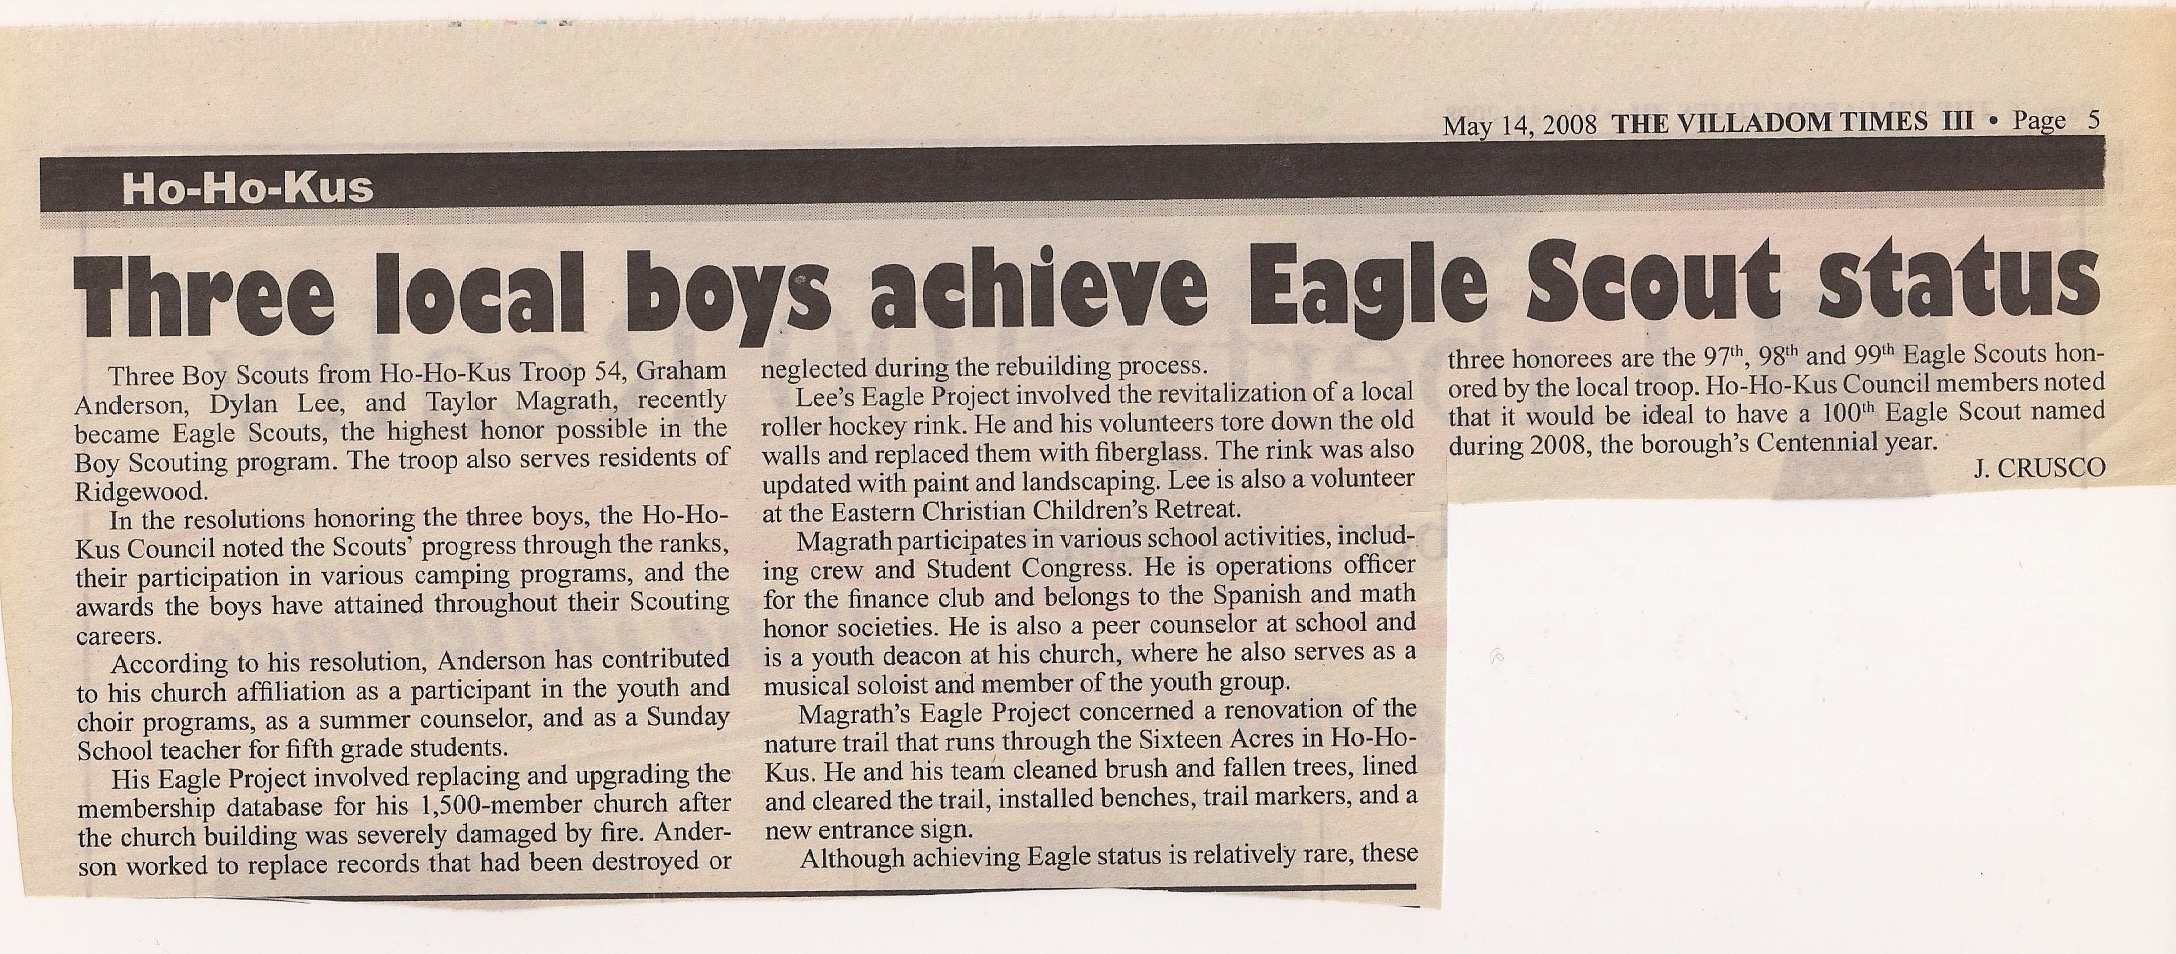 May 14, 2008 - Eagle Scouts - Graham Anderson, Dylan Lee, & Taylor Magrath